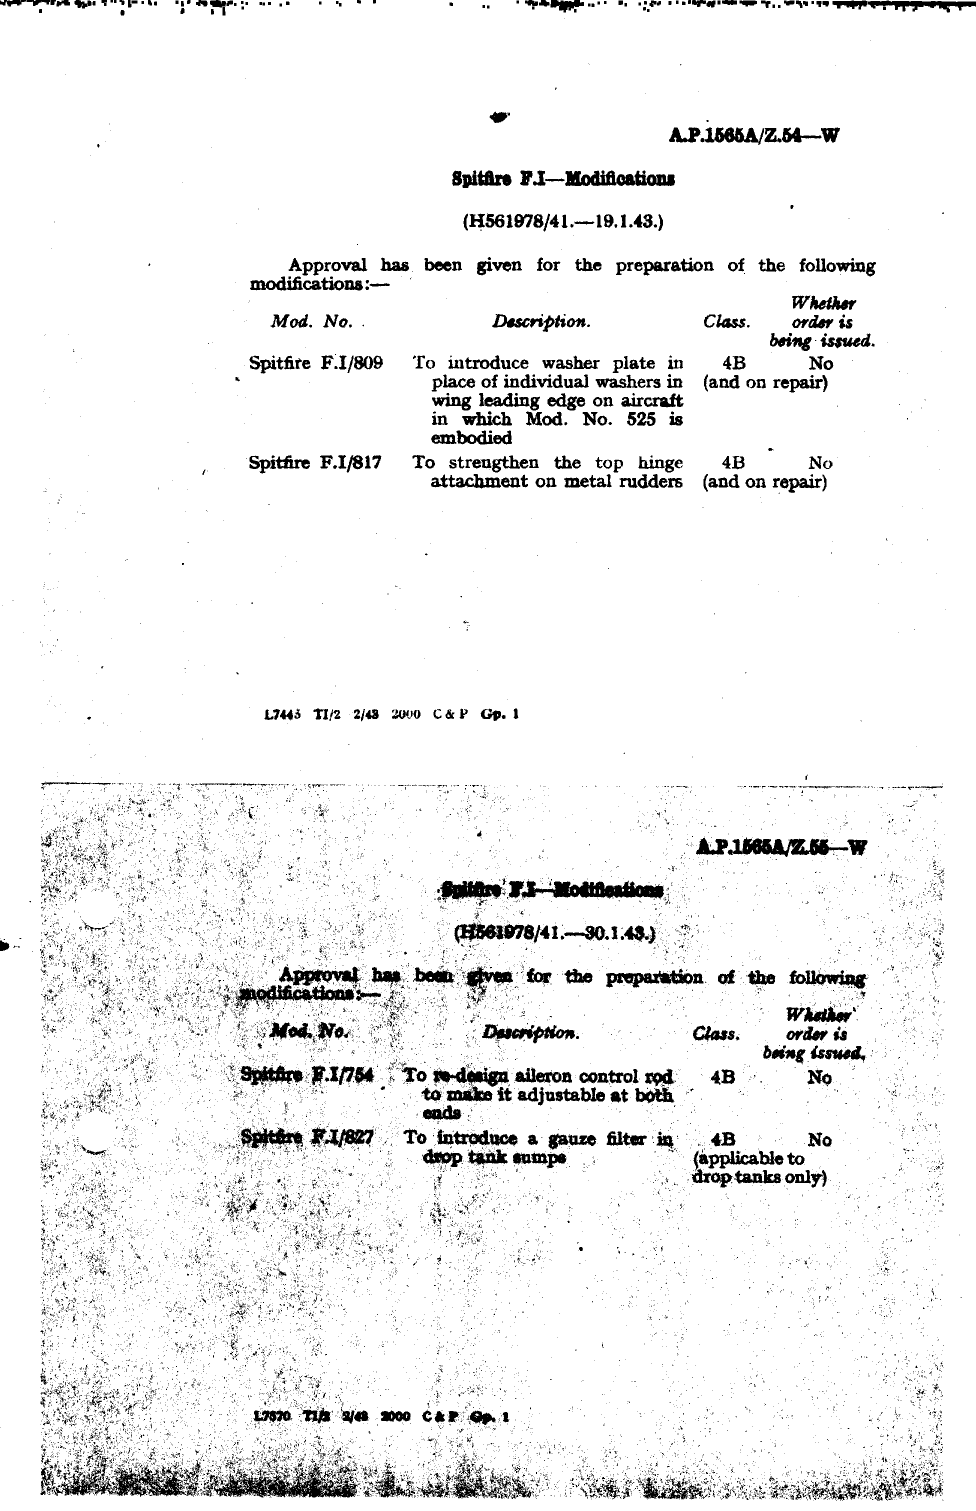 Sample page 1 from AirCorps Library document: Spitfire F.I Modifications 754 and 827